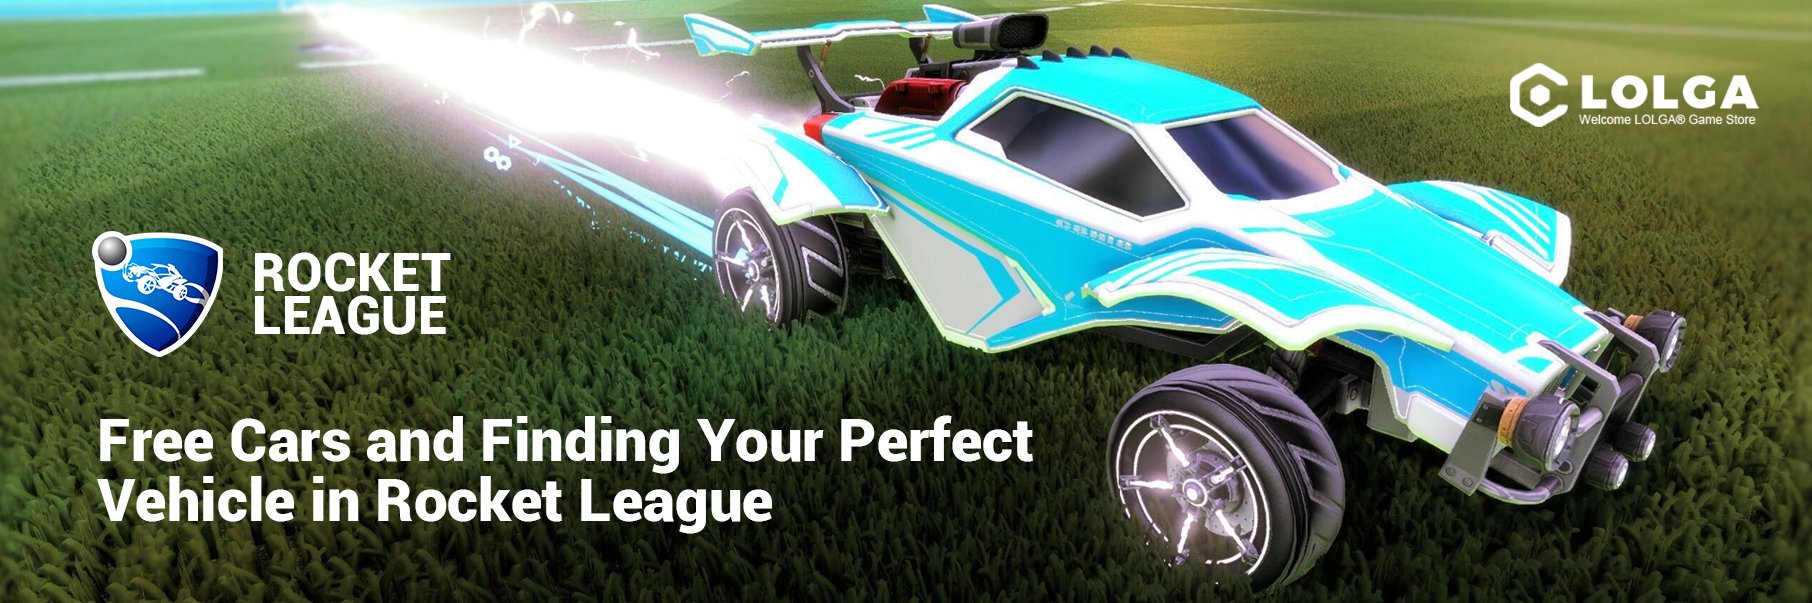 Free Cars and Finding Your Perfect Vehicle in Rocket League